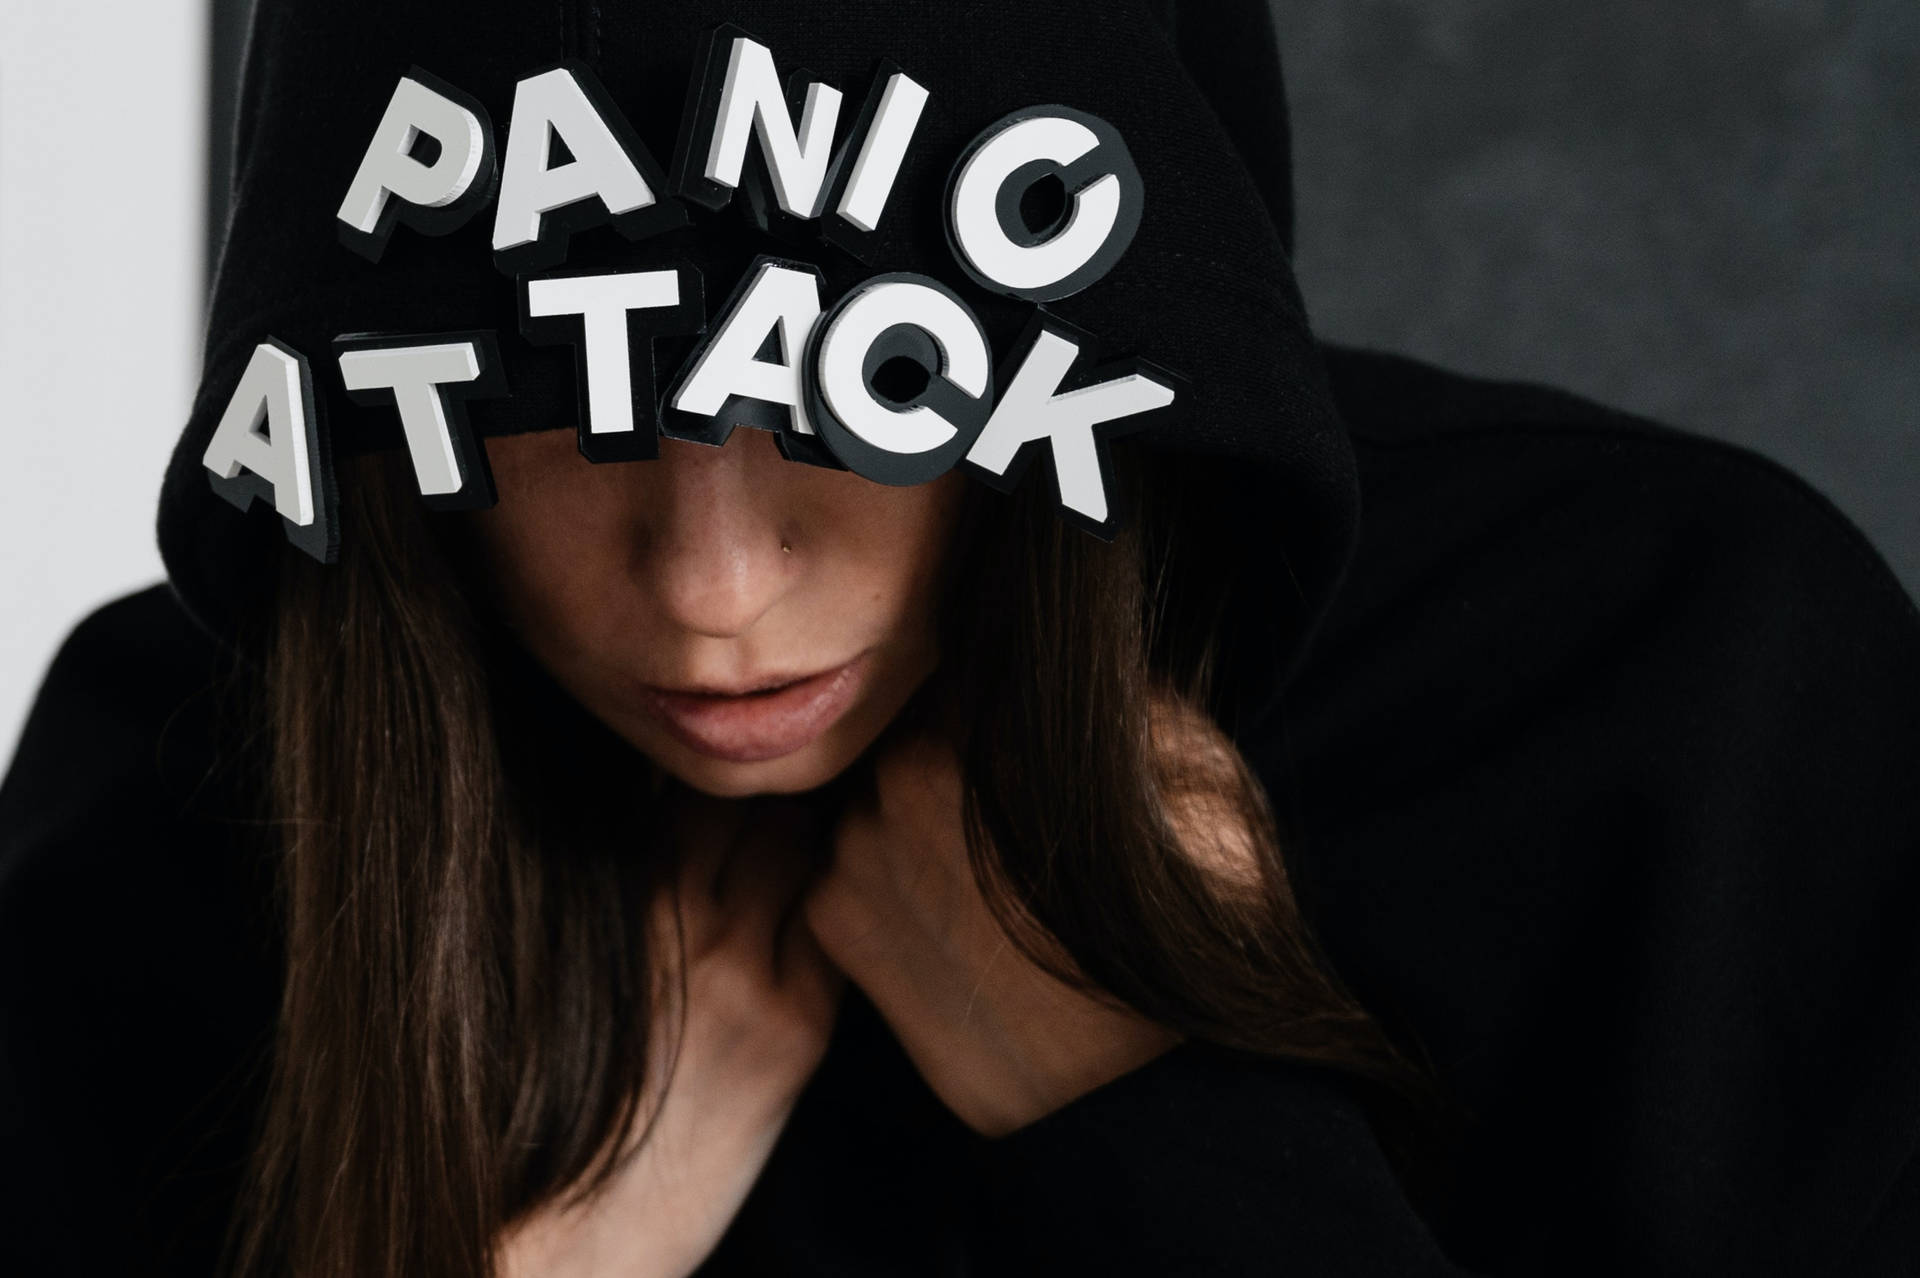 Woman In Panic Attack Hoodie Background